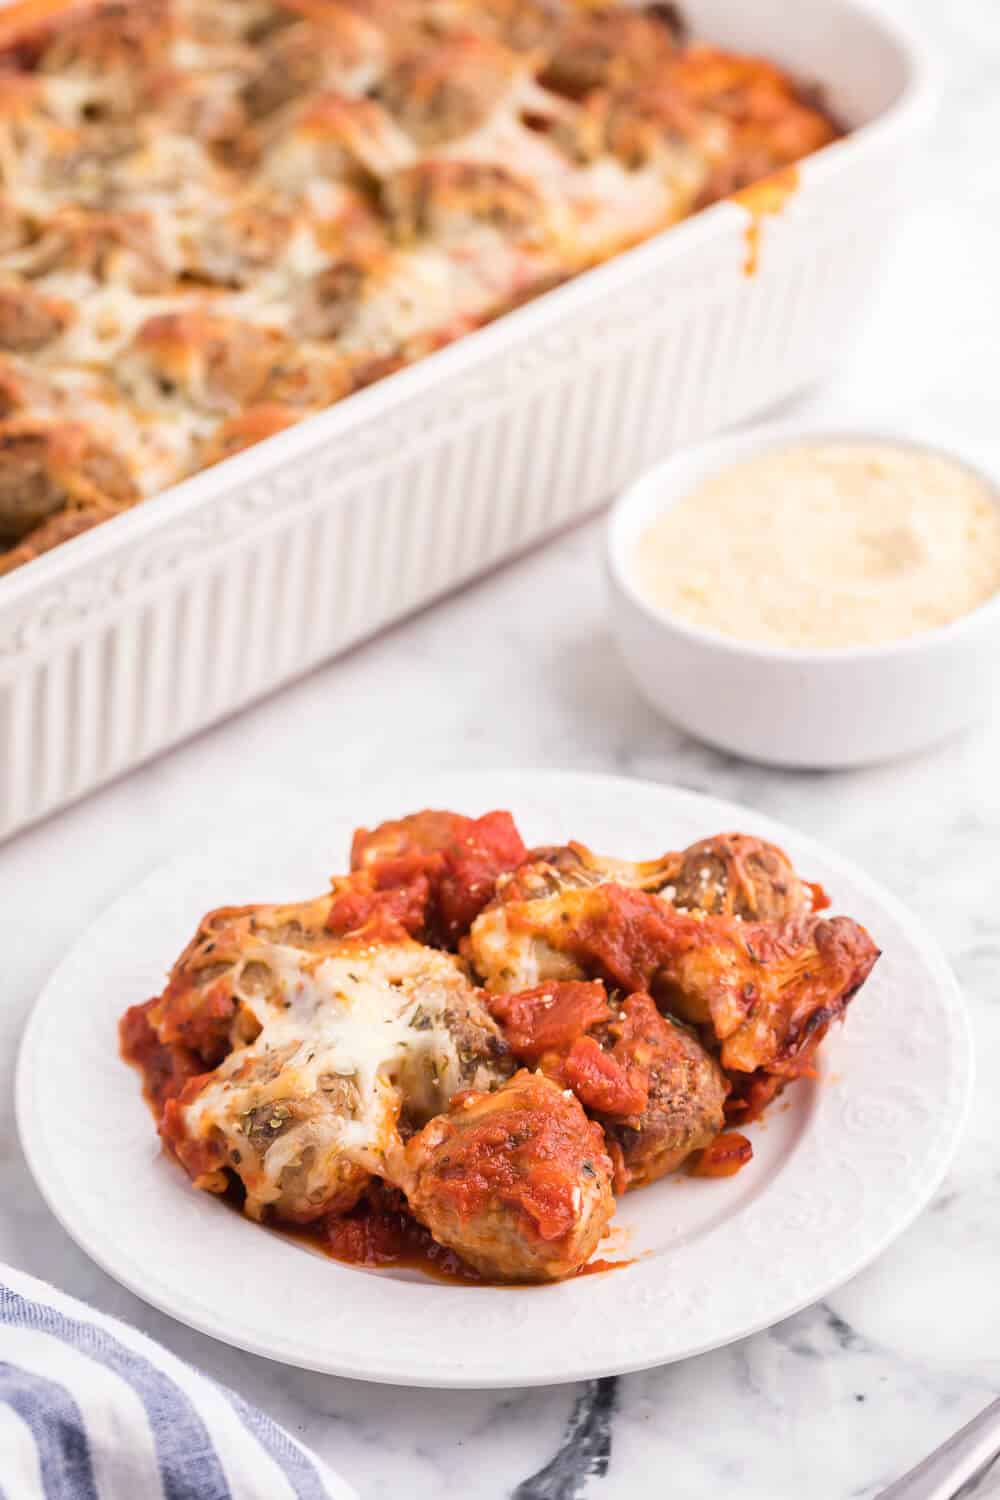 Meatball Sub Casserole - Made with convenient ready-made ingredients, this casserole tastes just like a meatball sub from your favourite sub shop!